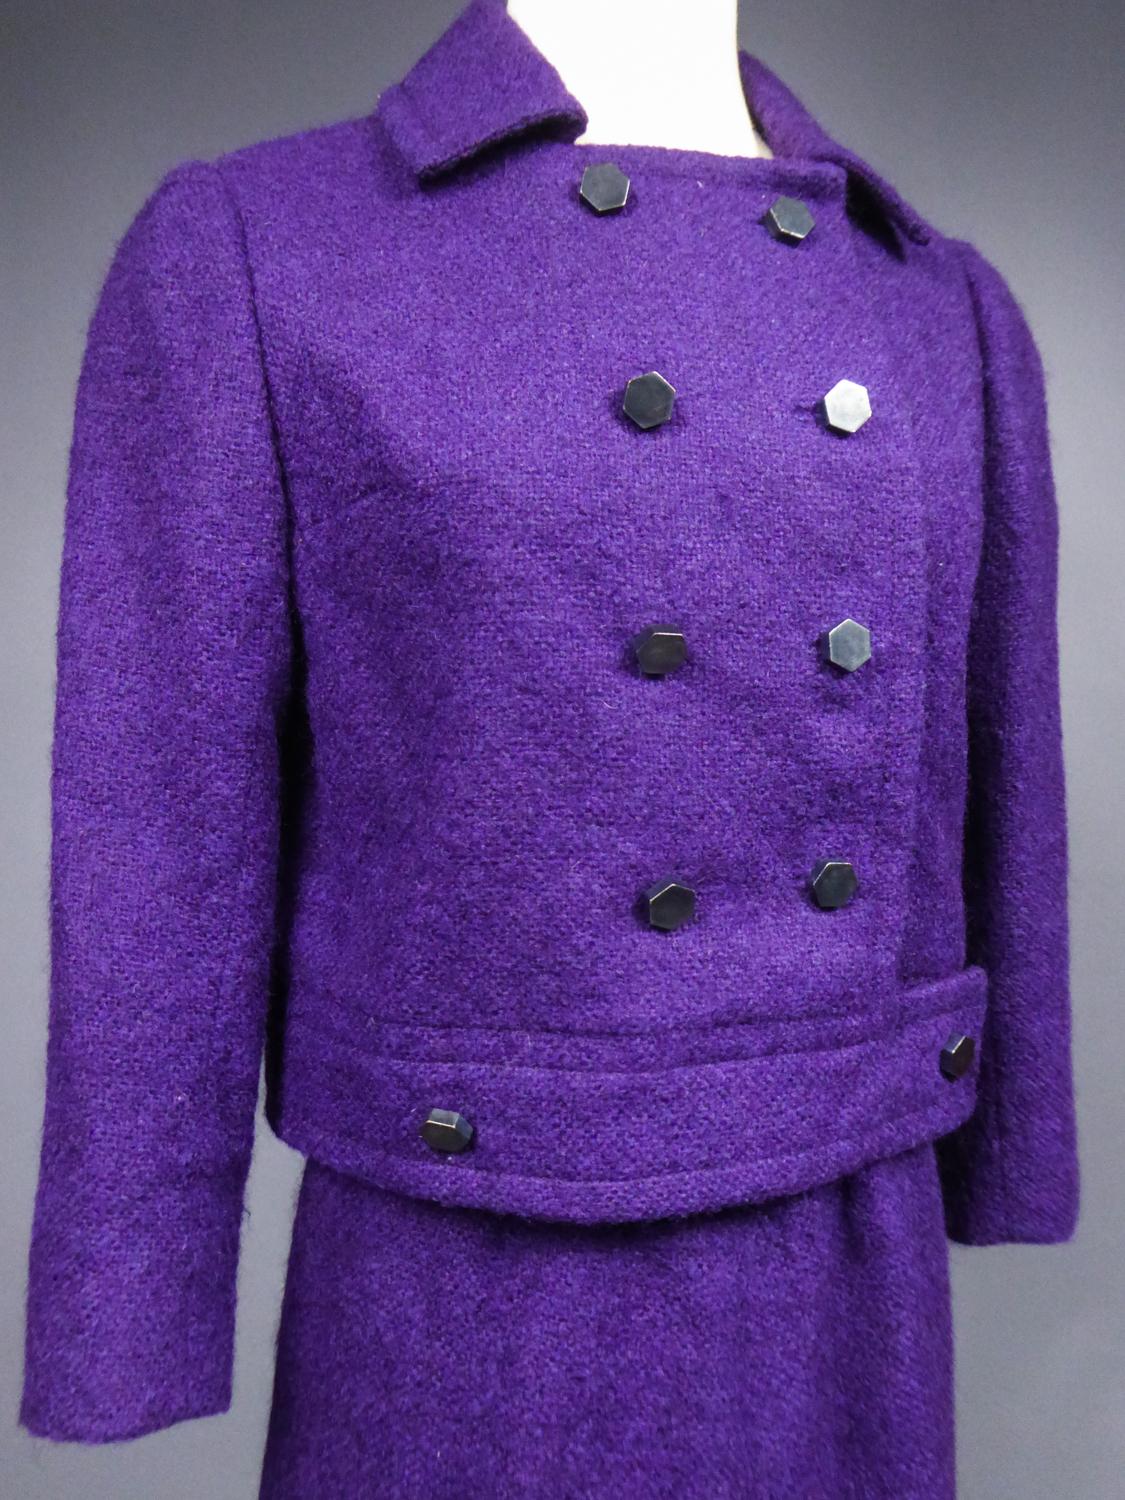 Circa 1970/1975

France

Interesting Bérénice Haute Couture demi couture skirt suit 52 rue Saint Ferréol, Marseille after a patron of the Dior House, dating from the 1970s/1975. Jacket and skirt 